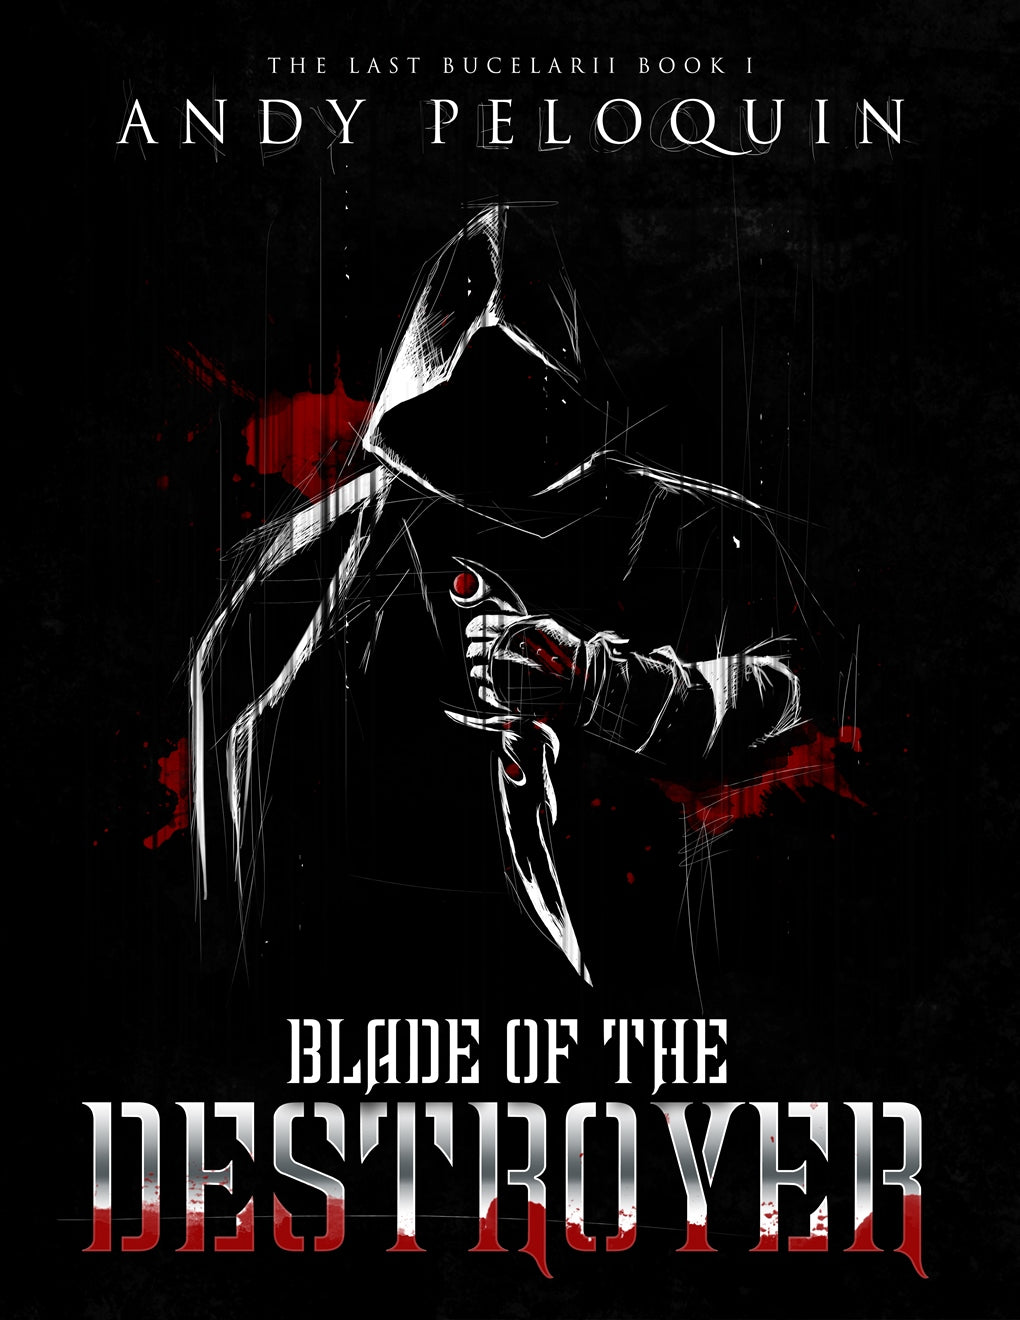 Blade of the Destroyer Book Reviews